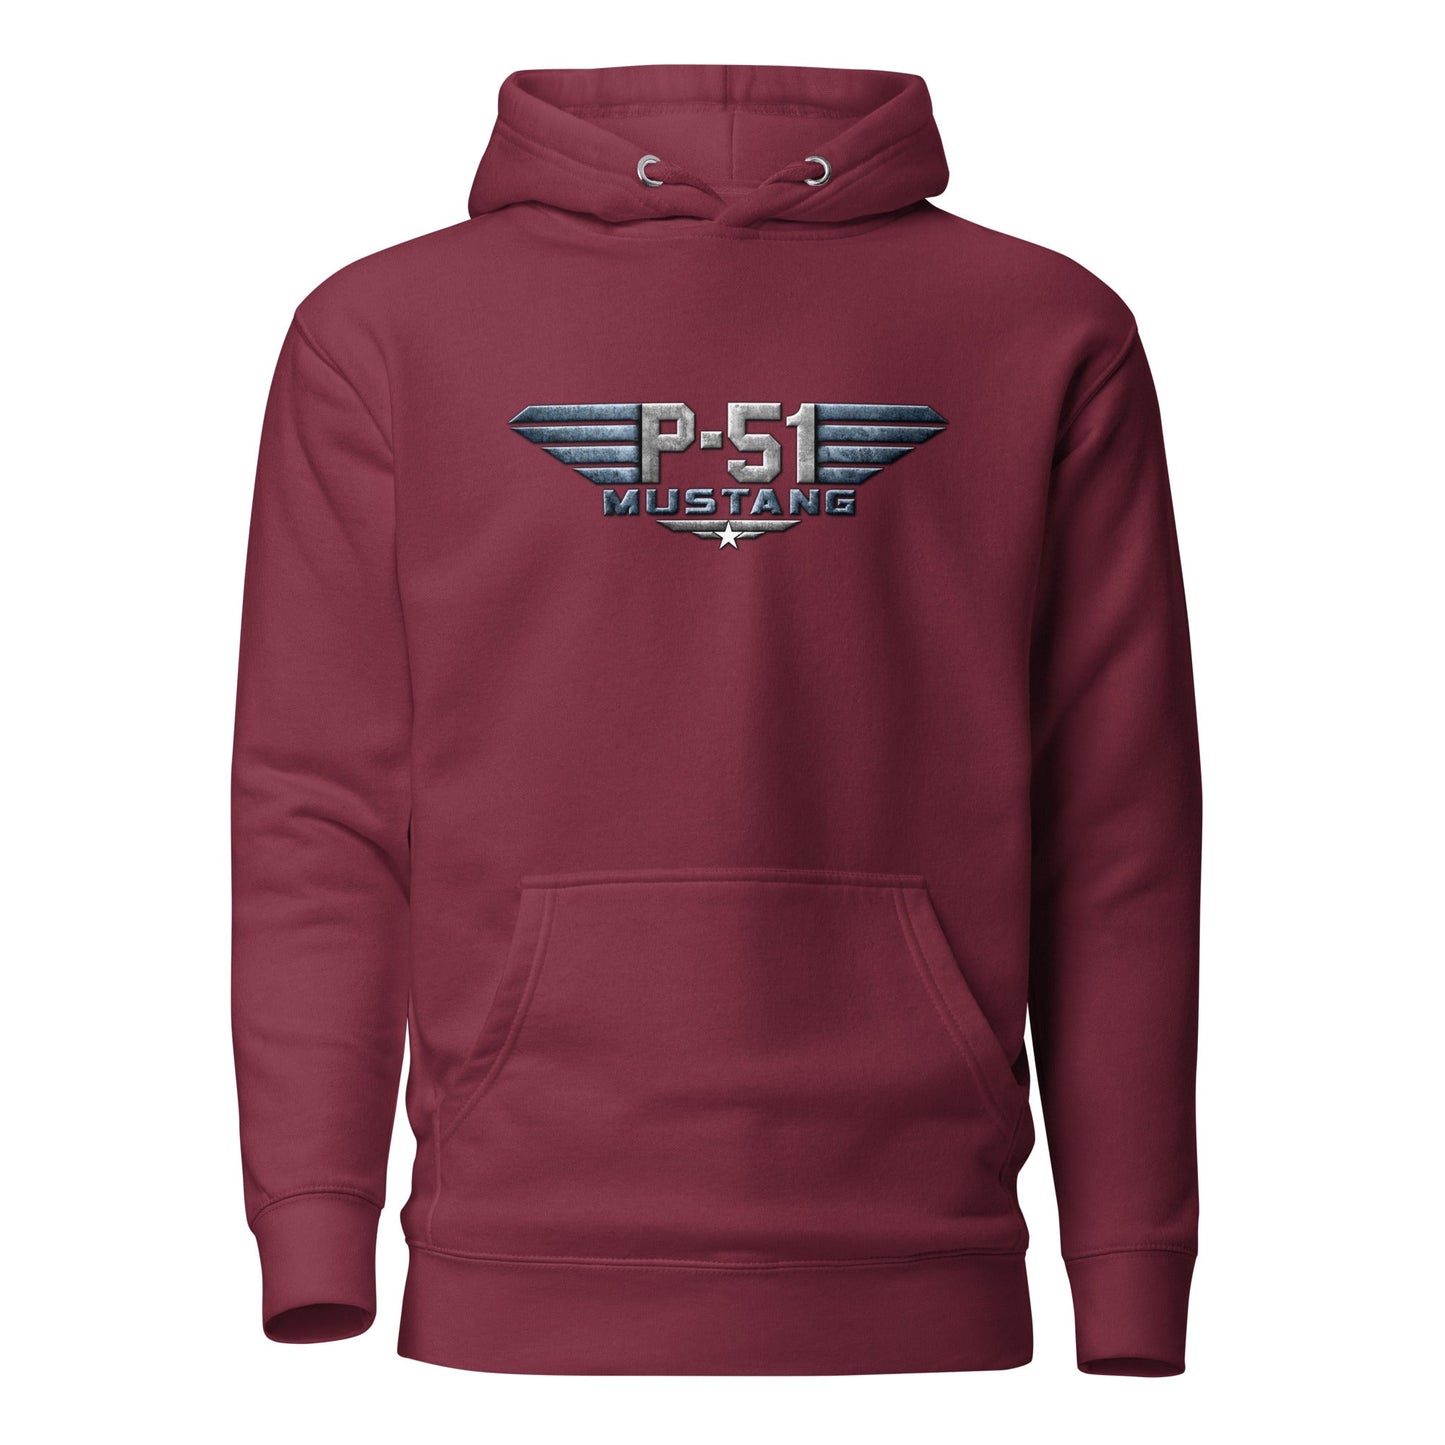 P-51-mustang-aircraft-unisex-graphic-hoodie-red-arczeal-designs